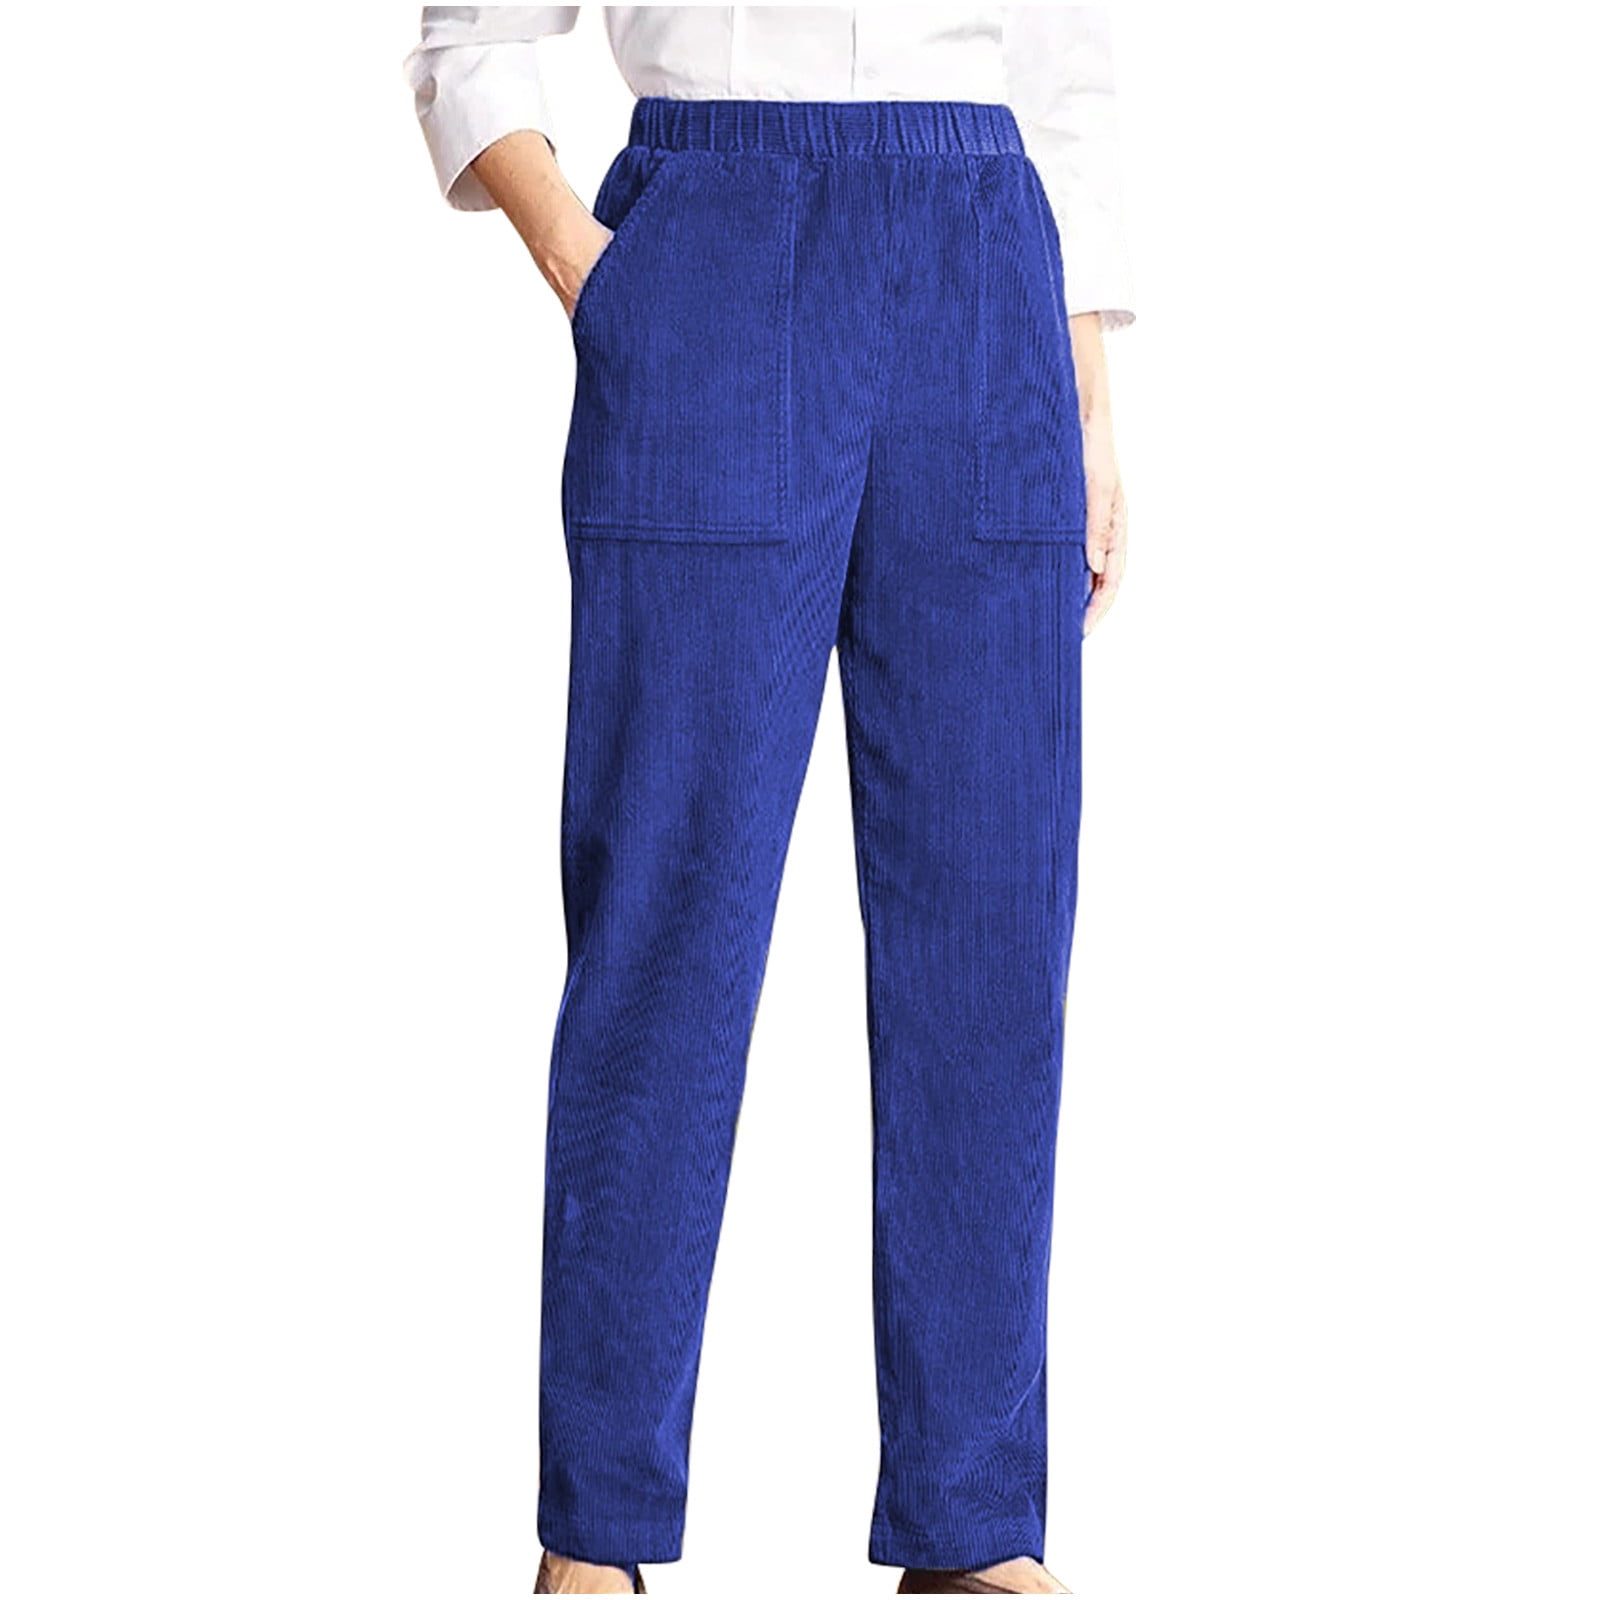 Women's Casual Corduroy Pants Elastic Waist Vintage Pants Drawstring  Straight Leg Trousers with Pockets Black at  Women's Clothing store